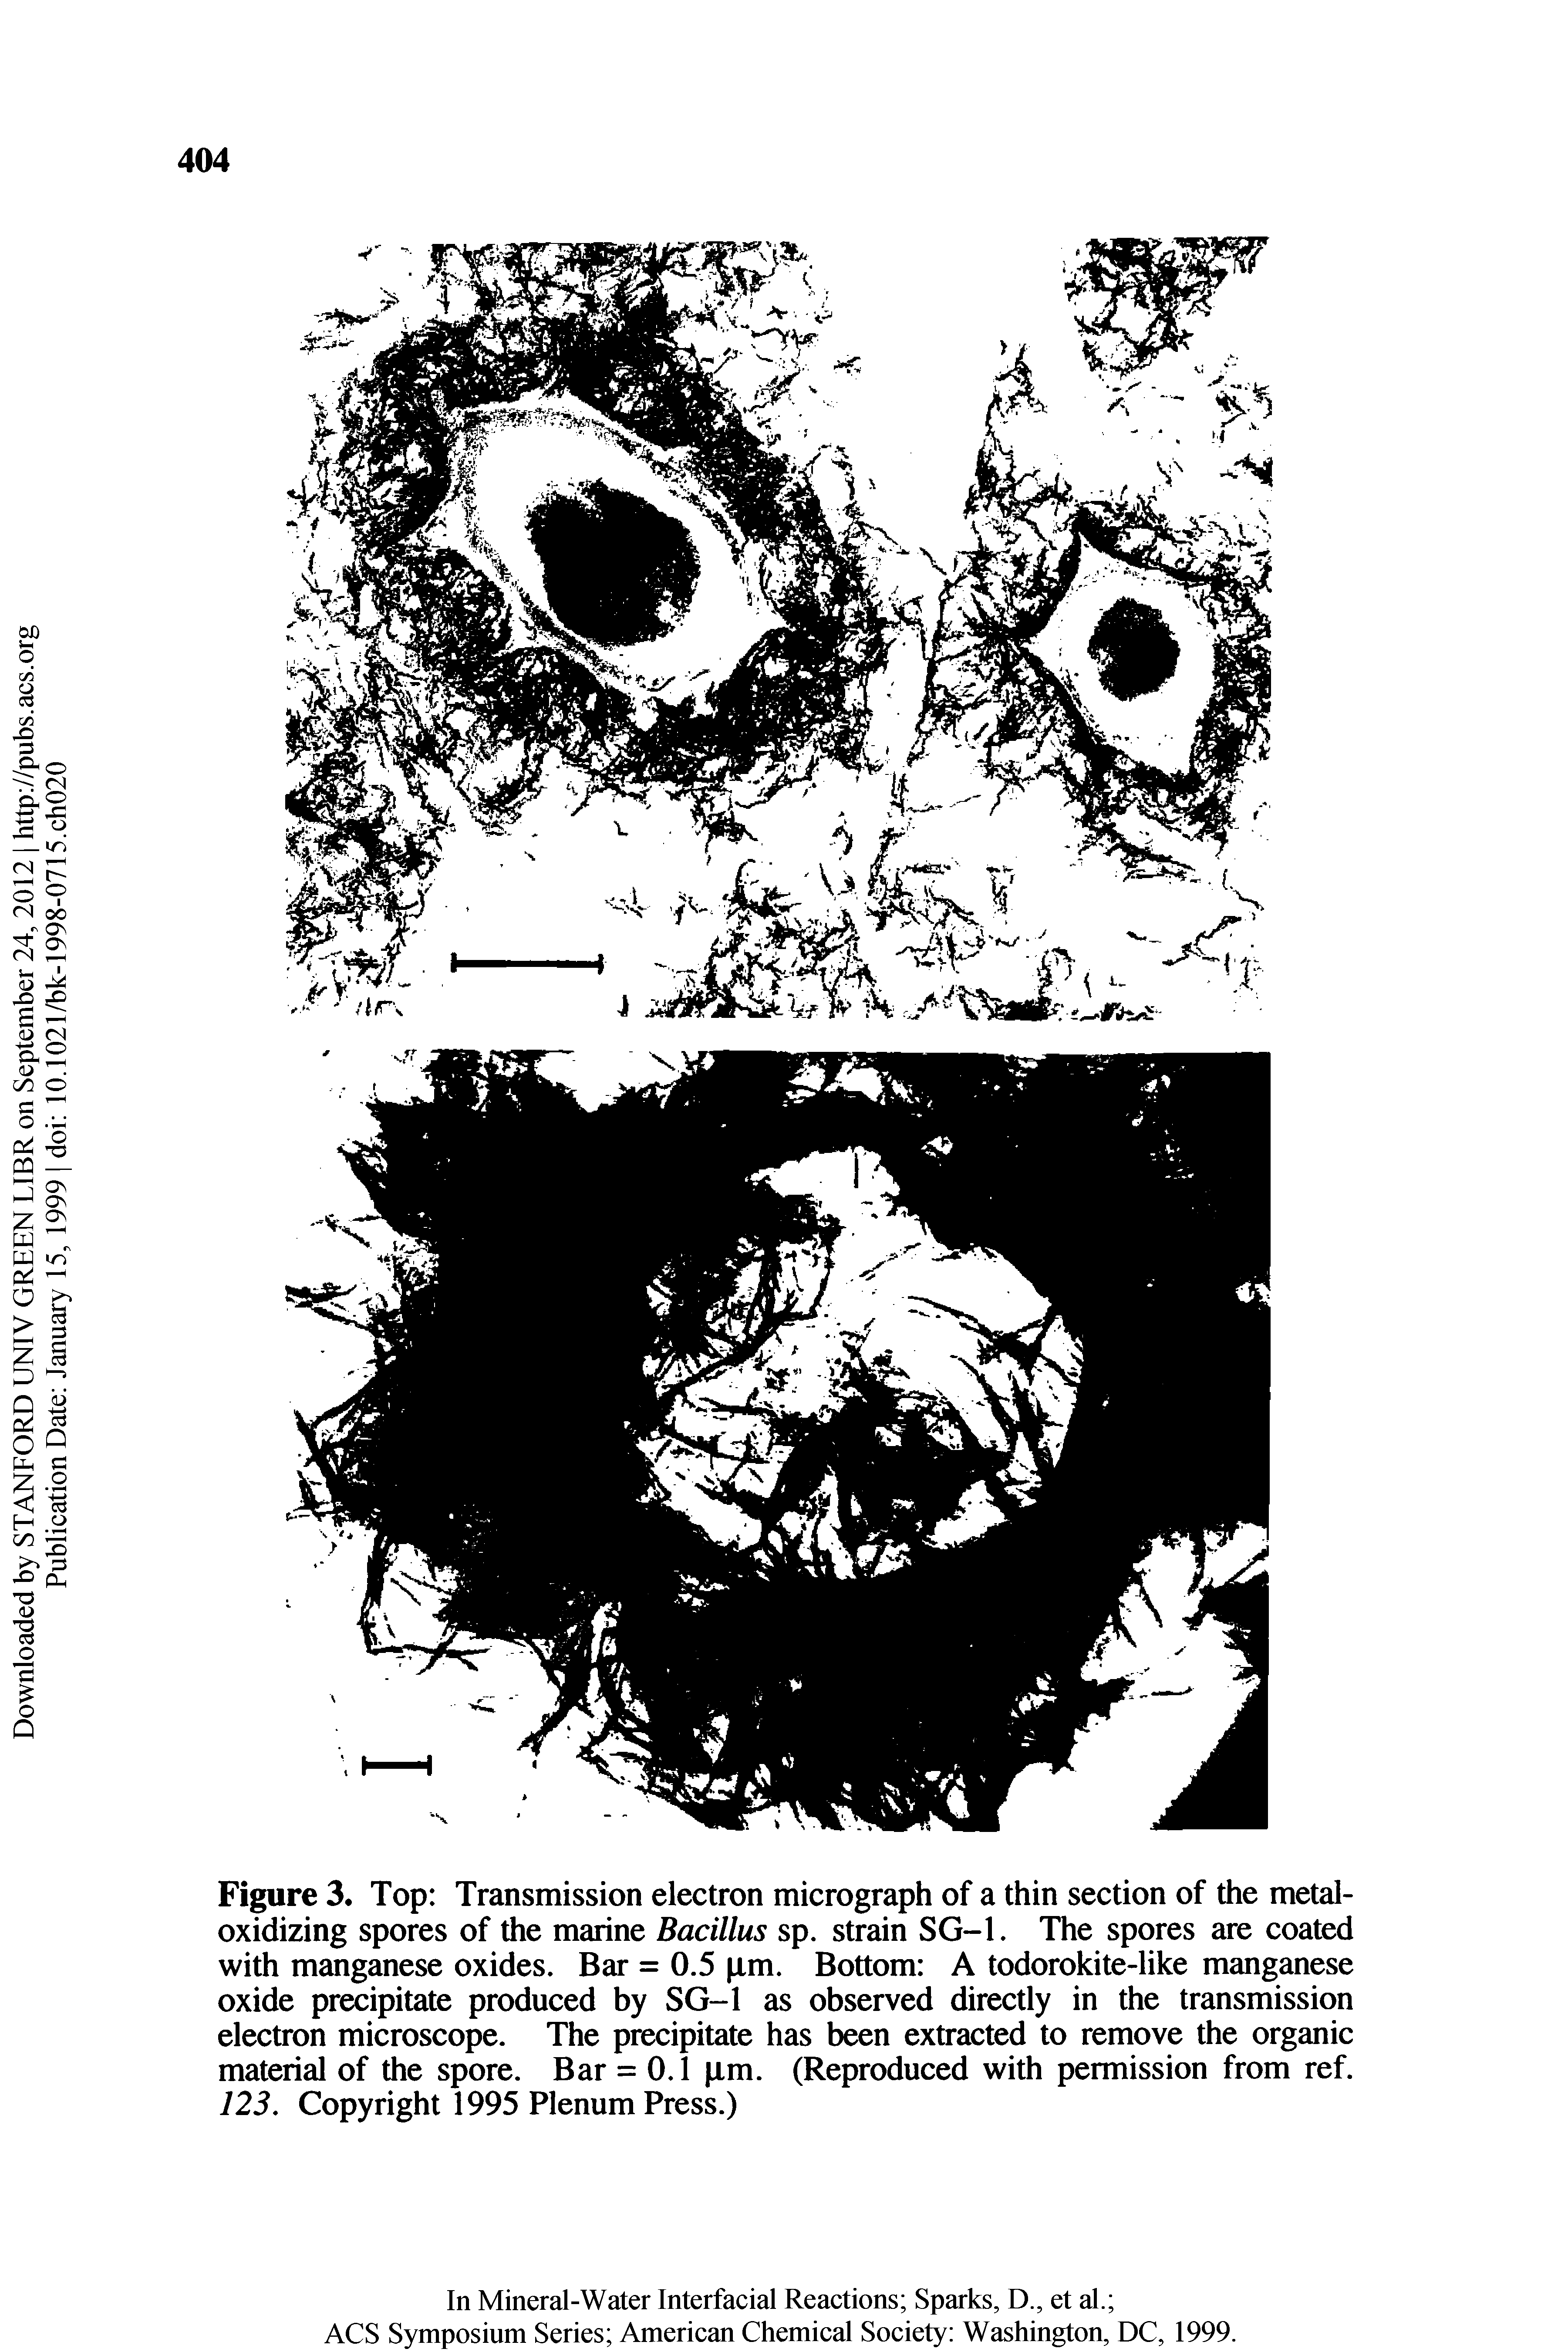 Figure 3. Top Transmission electron micrograph of a thin section of the metal-oxidizing spores of the marine Bacillus sp. strain SG-1. The spores are coated with manganese oxides. Bar = 0.5 xm. Bottom A todorokite-like manganese oxide precipitate produced by SG-1 as observed directly in the transmission electron microscope. The precipitate has been extracted to remove the organic material of the spore. Bar = 0.1 im. (Reproduced with permission from ref. 123, Copyright 1995 Plenum Press.)...